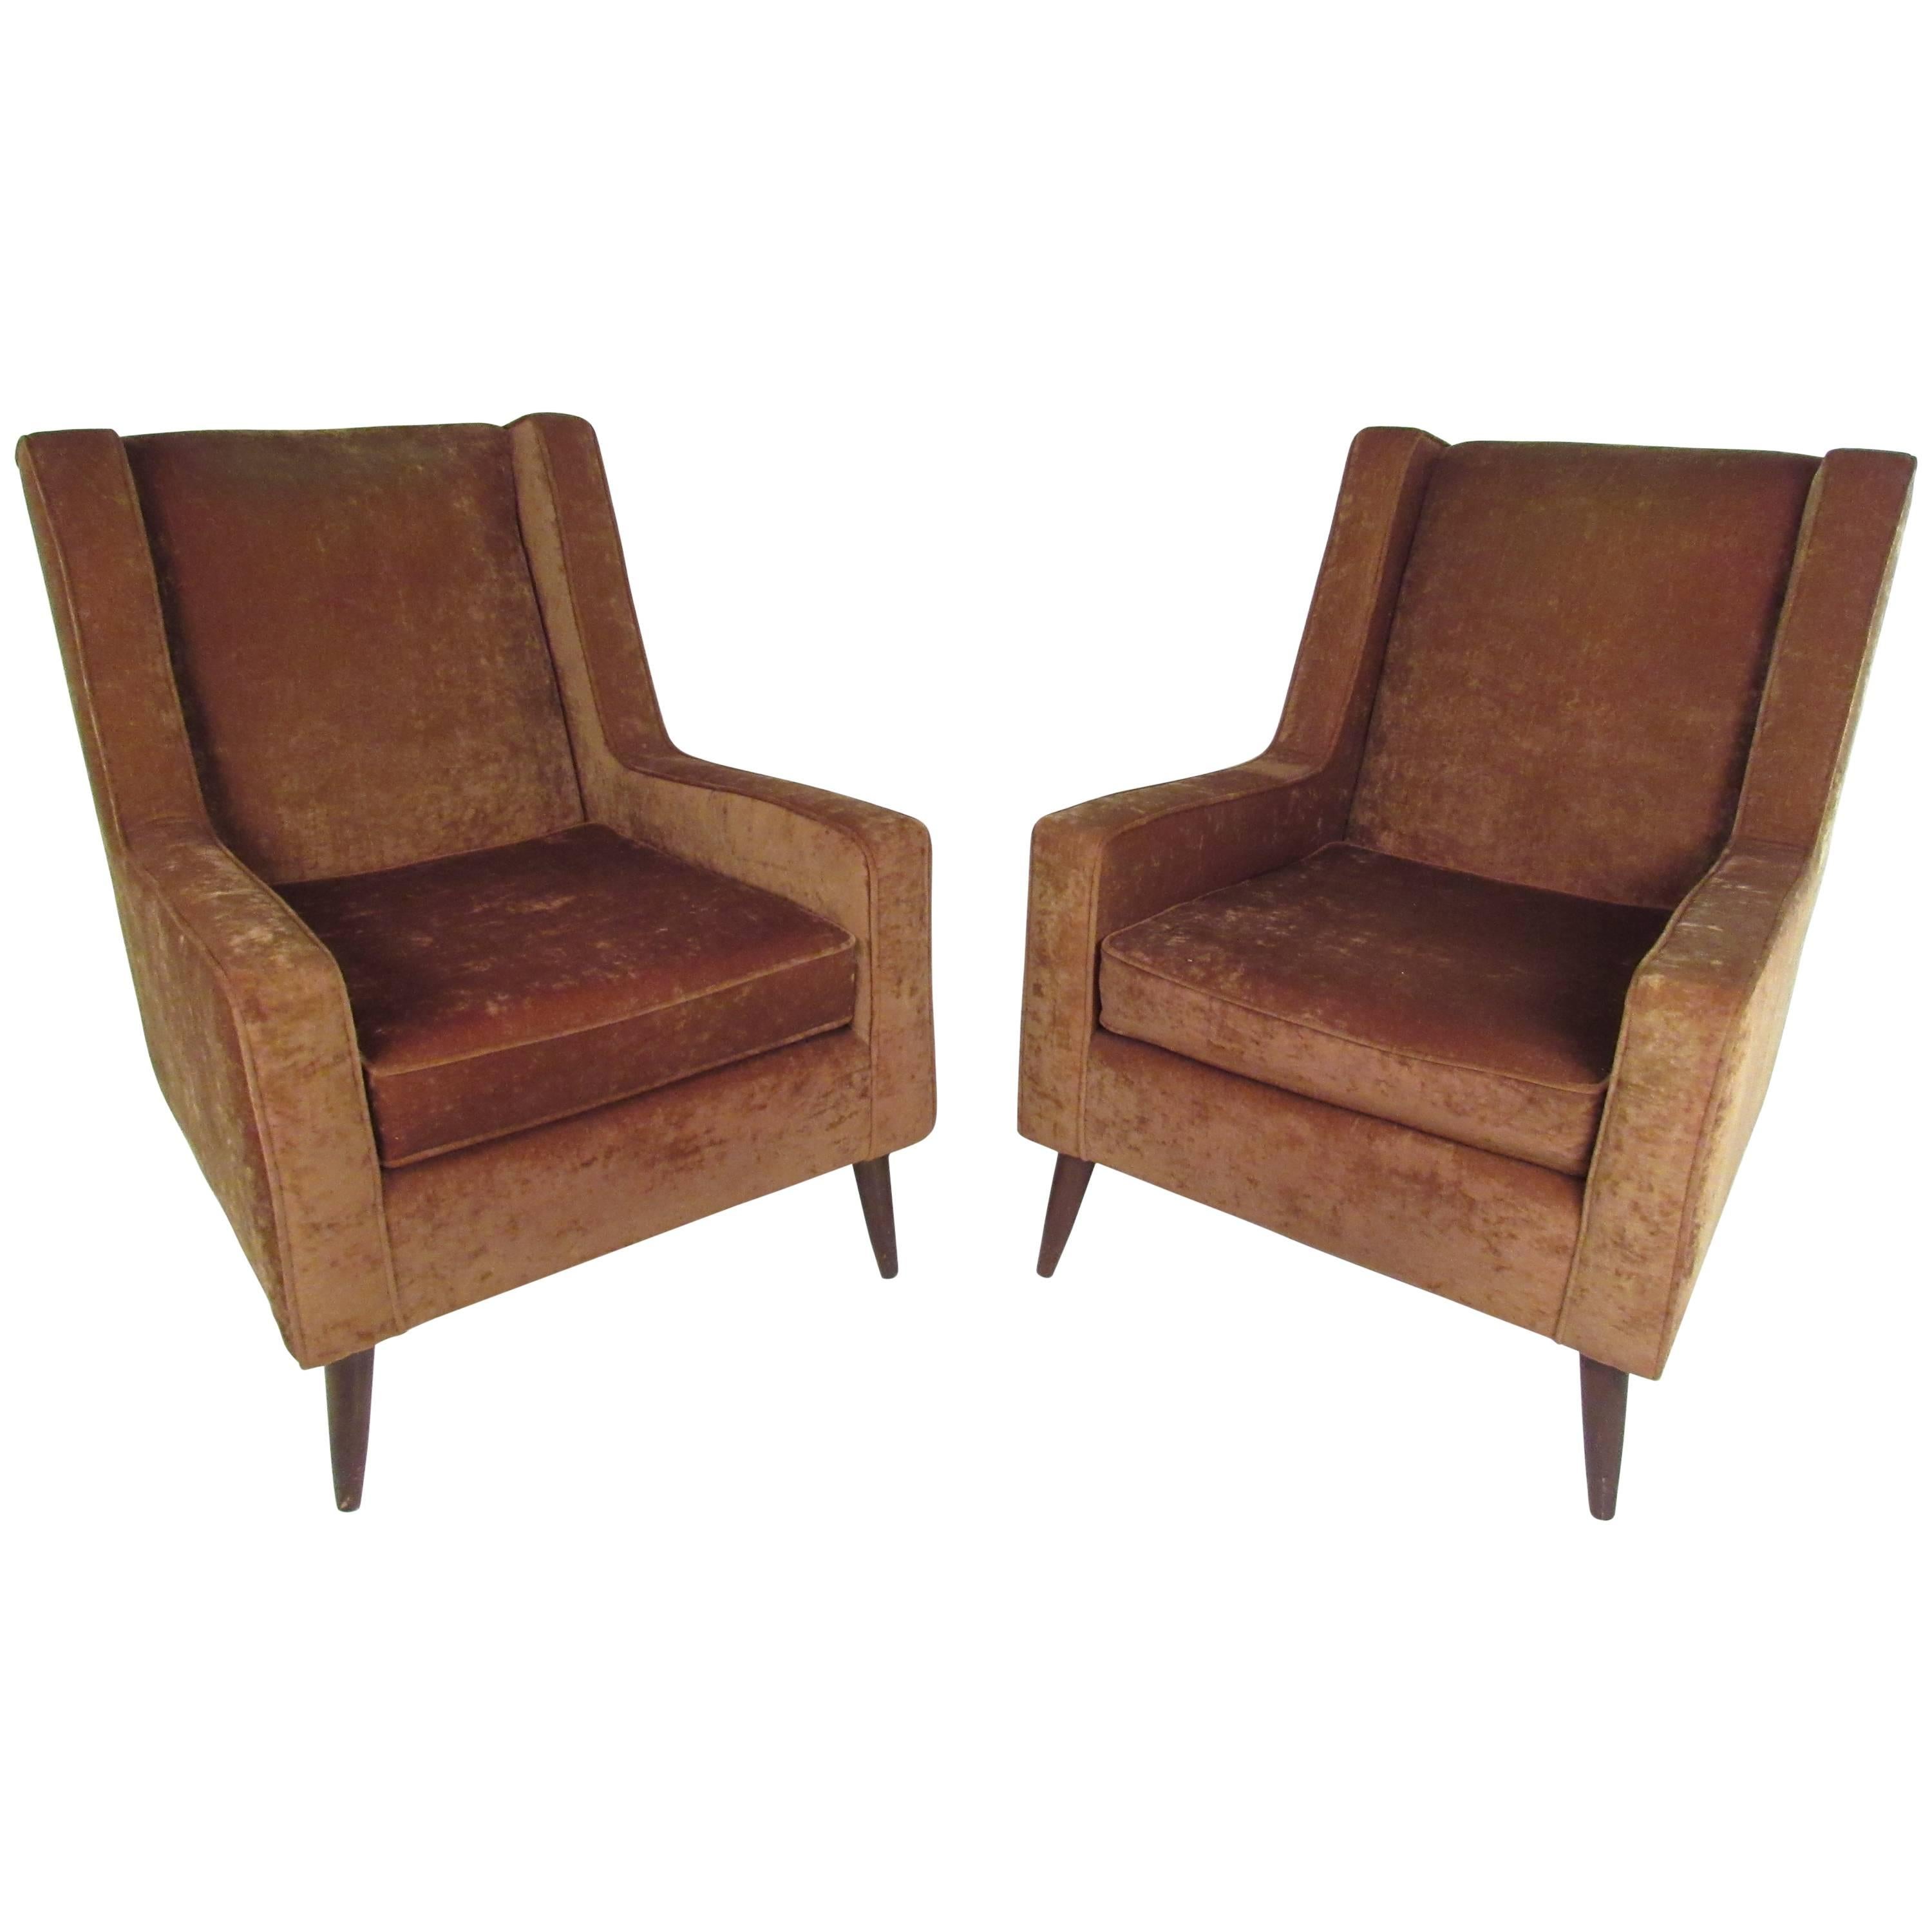 Pair of Vintage Paul McCobb Style Lounge Chairs